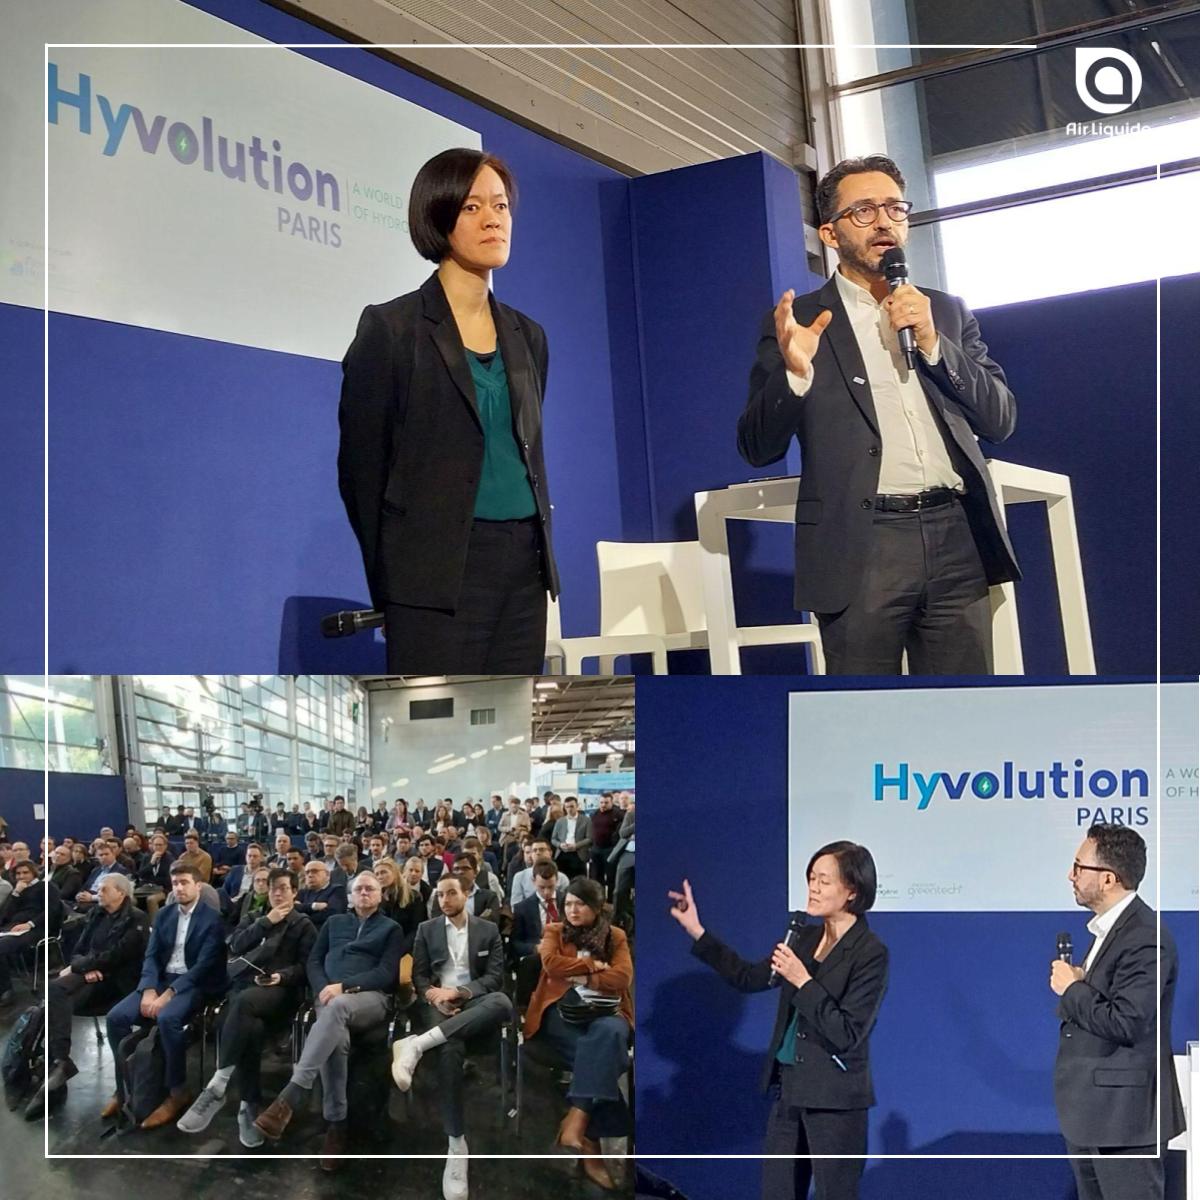 [En direct] @Hyvolution “Our partnership with @Siemens_Energy offers a unique value proposition to our Customers. It combines both Groups expertise in technology, operational excellence and manufacturing.” Marie-Khuny Khy, Electrolysis Product Line Director, E&C at Air Liquide